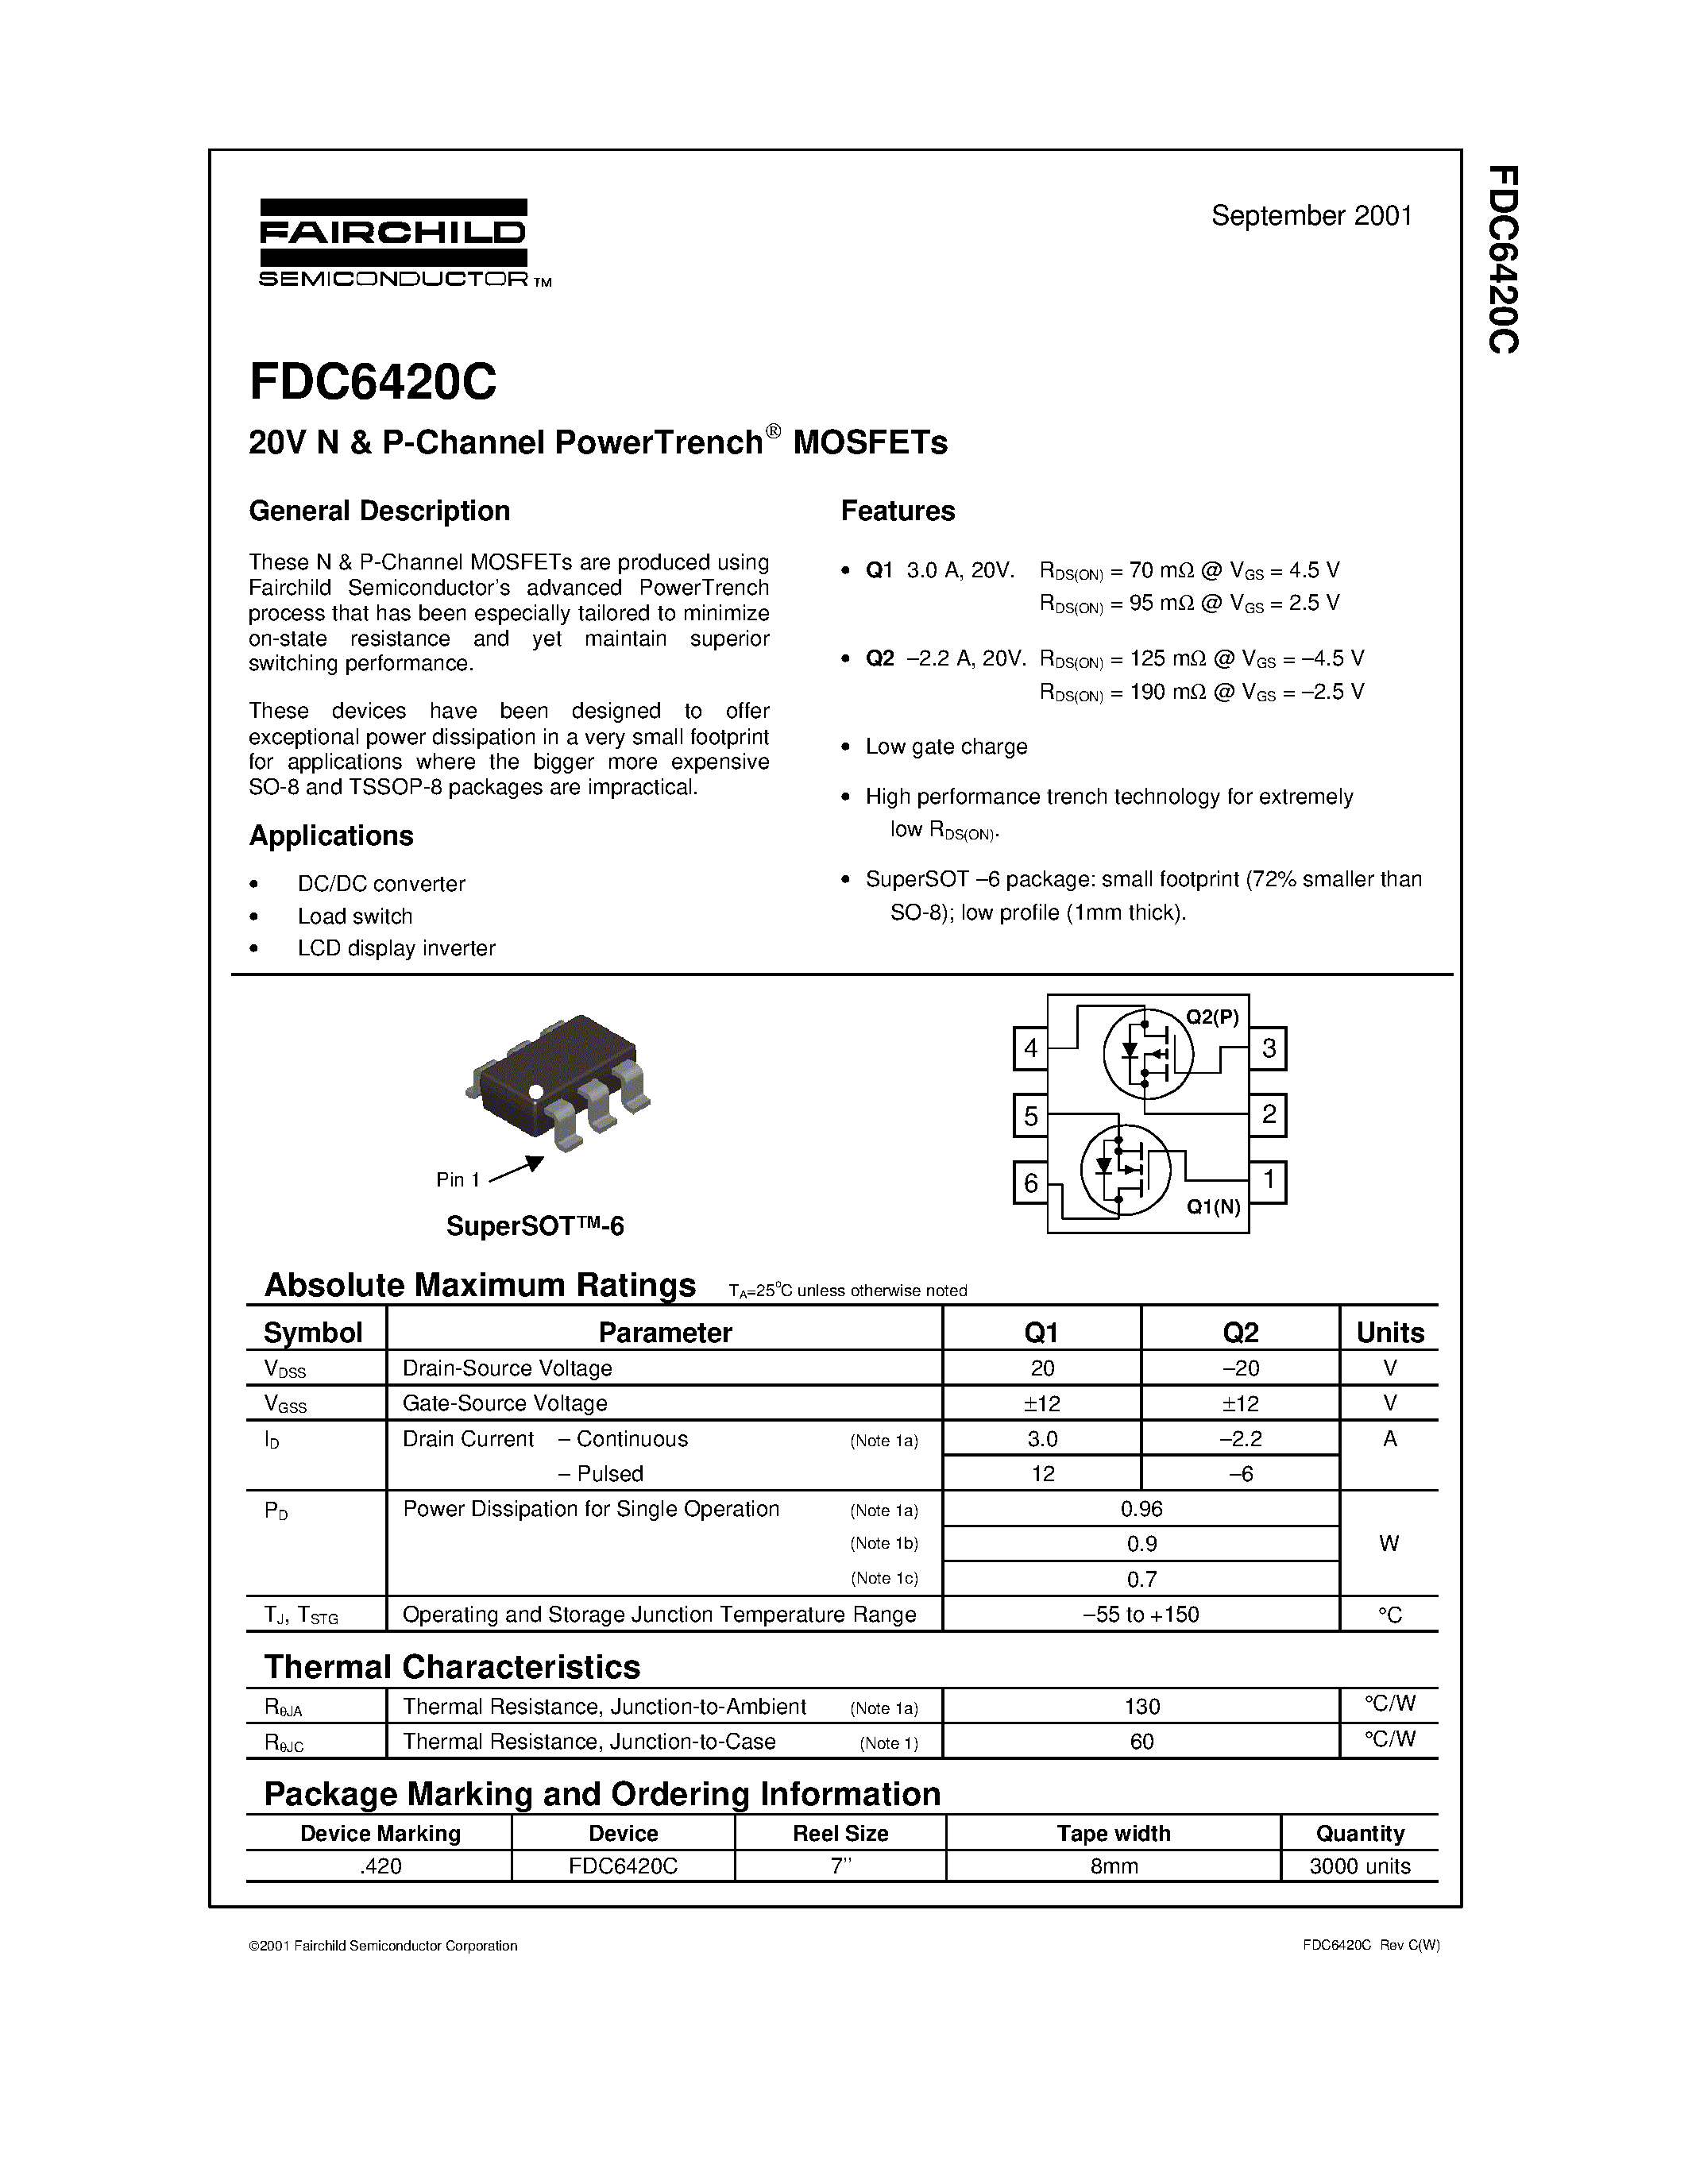 Datasheet FDC6420 - 20V N & P-Channel PowerTrench MOSFETs page 1